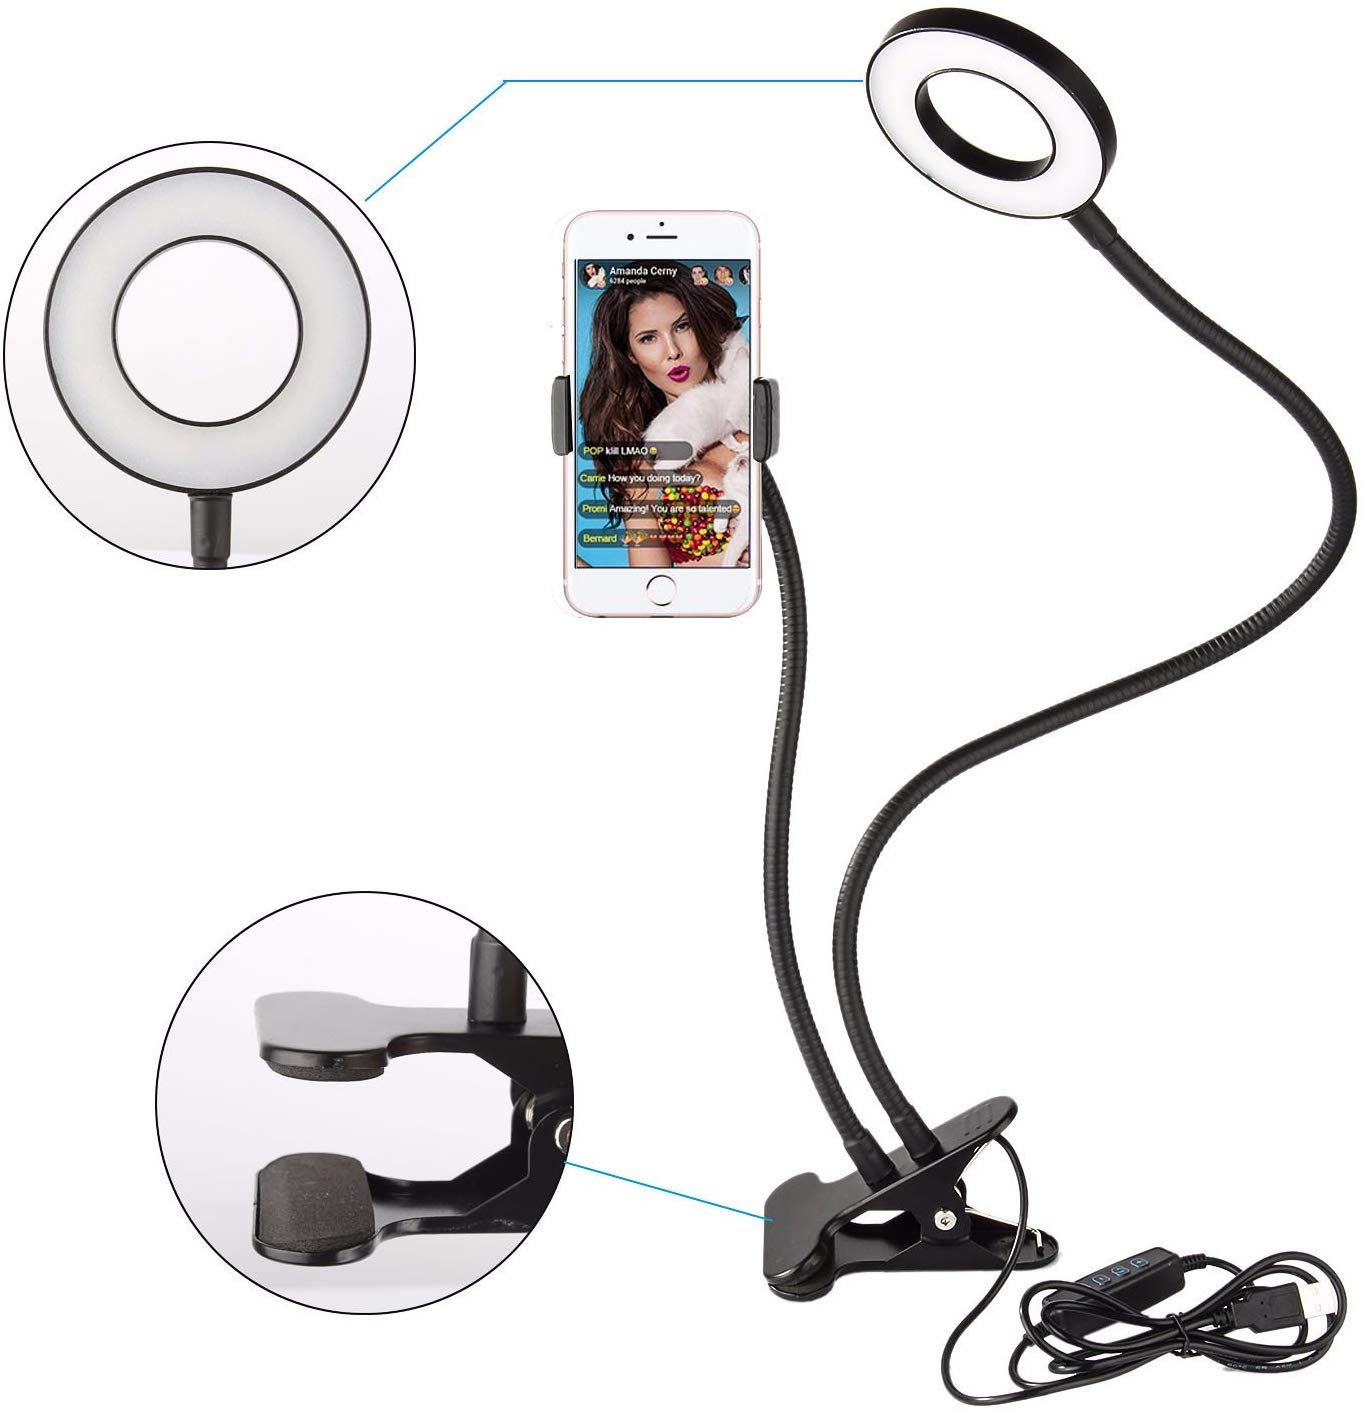 Kadence Xtreme Acoustics DIG-SEF LED Selfie Ring Light with Adjustable  Tripod Stand (10 inches), 3 Mobile Phone Holders and 3 Lighting Modes  (Warm, Soft and White) for Youtube, Tiktok, Instagram Recording. :